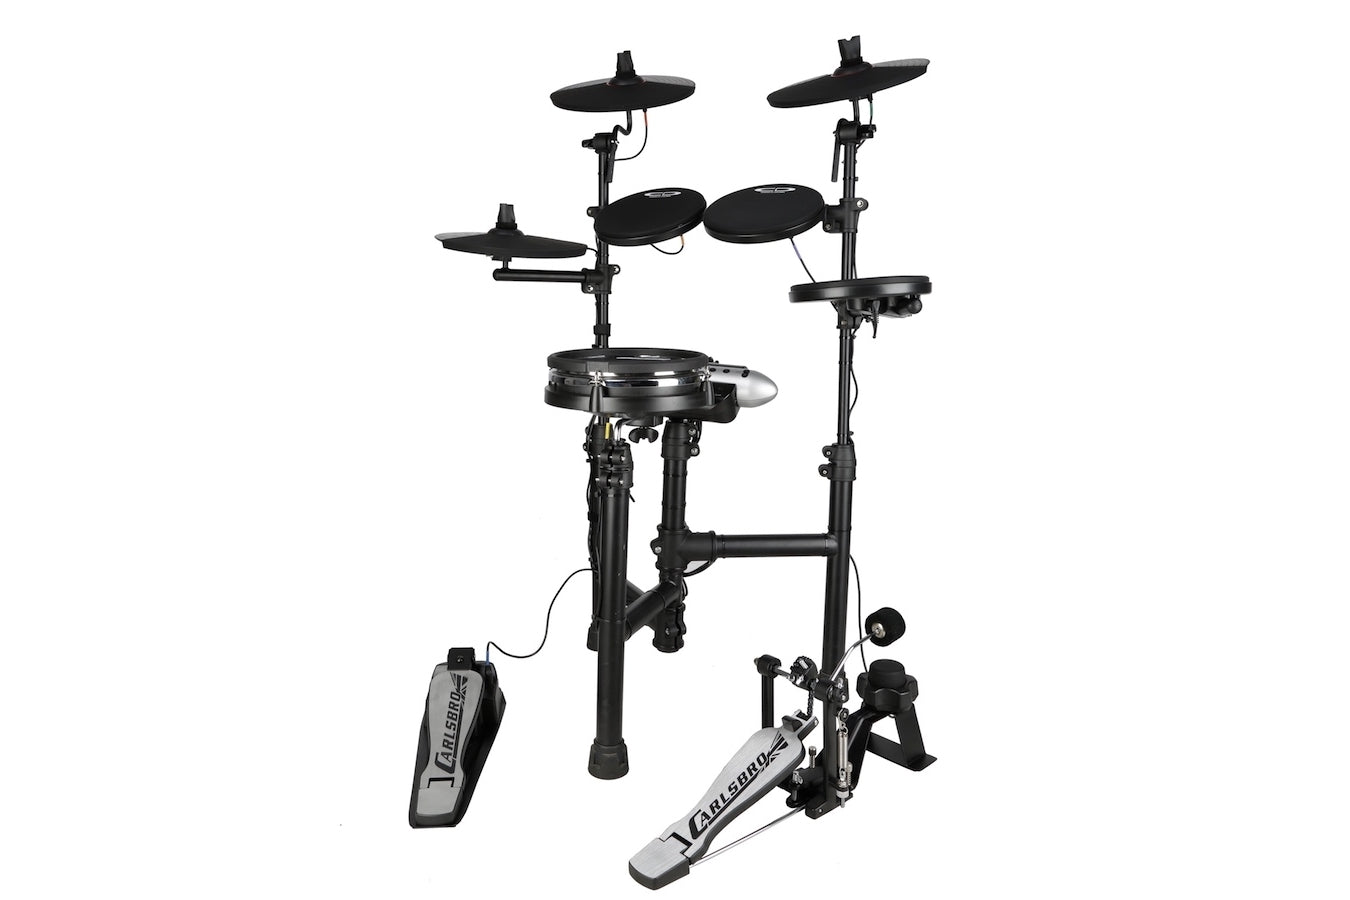 CSD130M 8-Piece Electronic Drum Kit features an 8inch Mesh snare drum pad